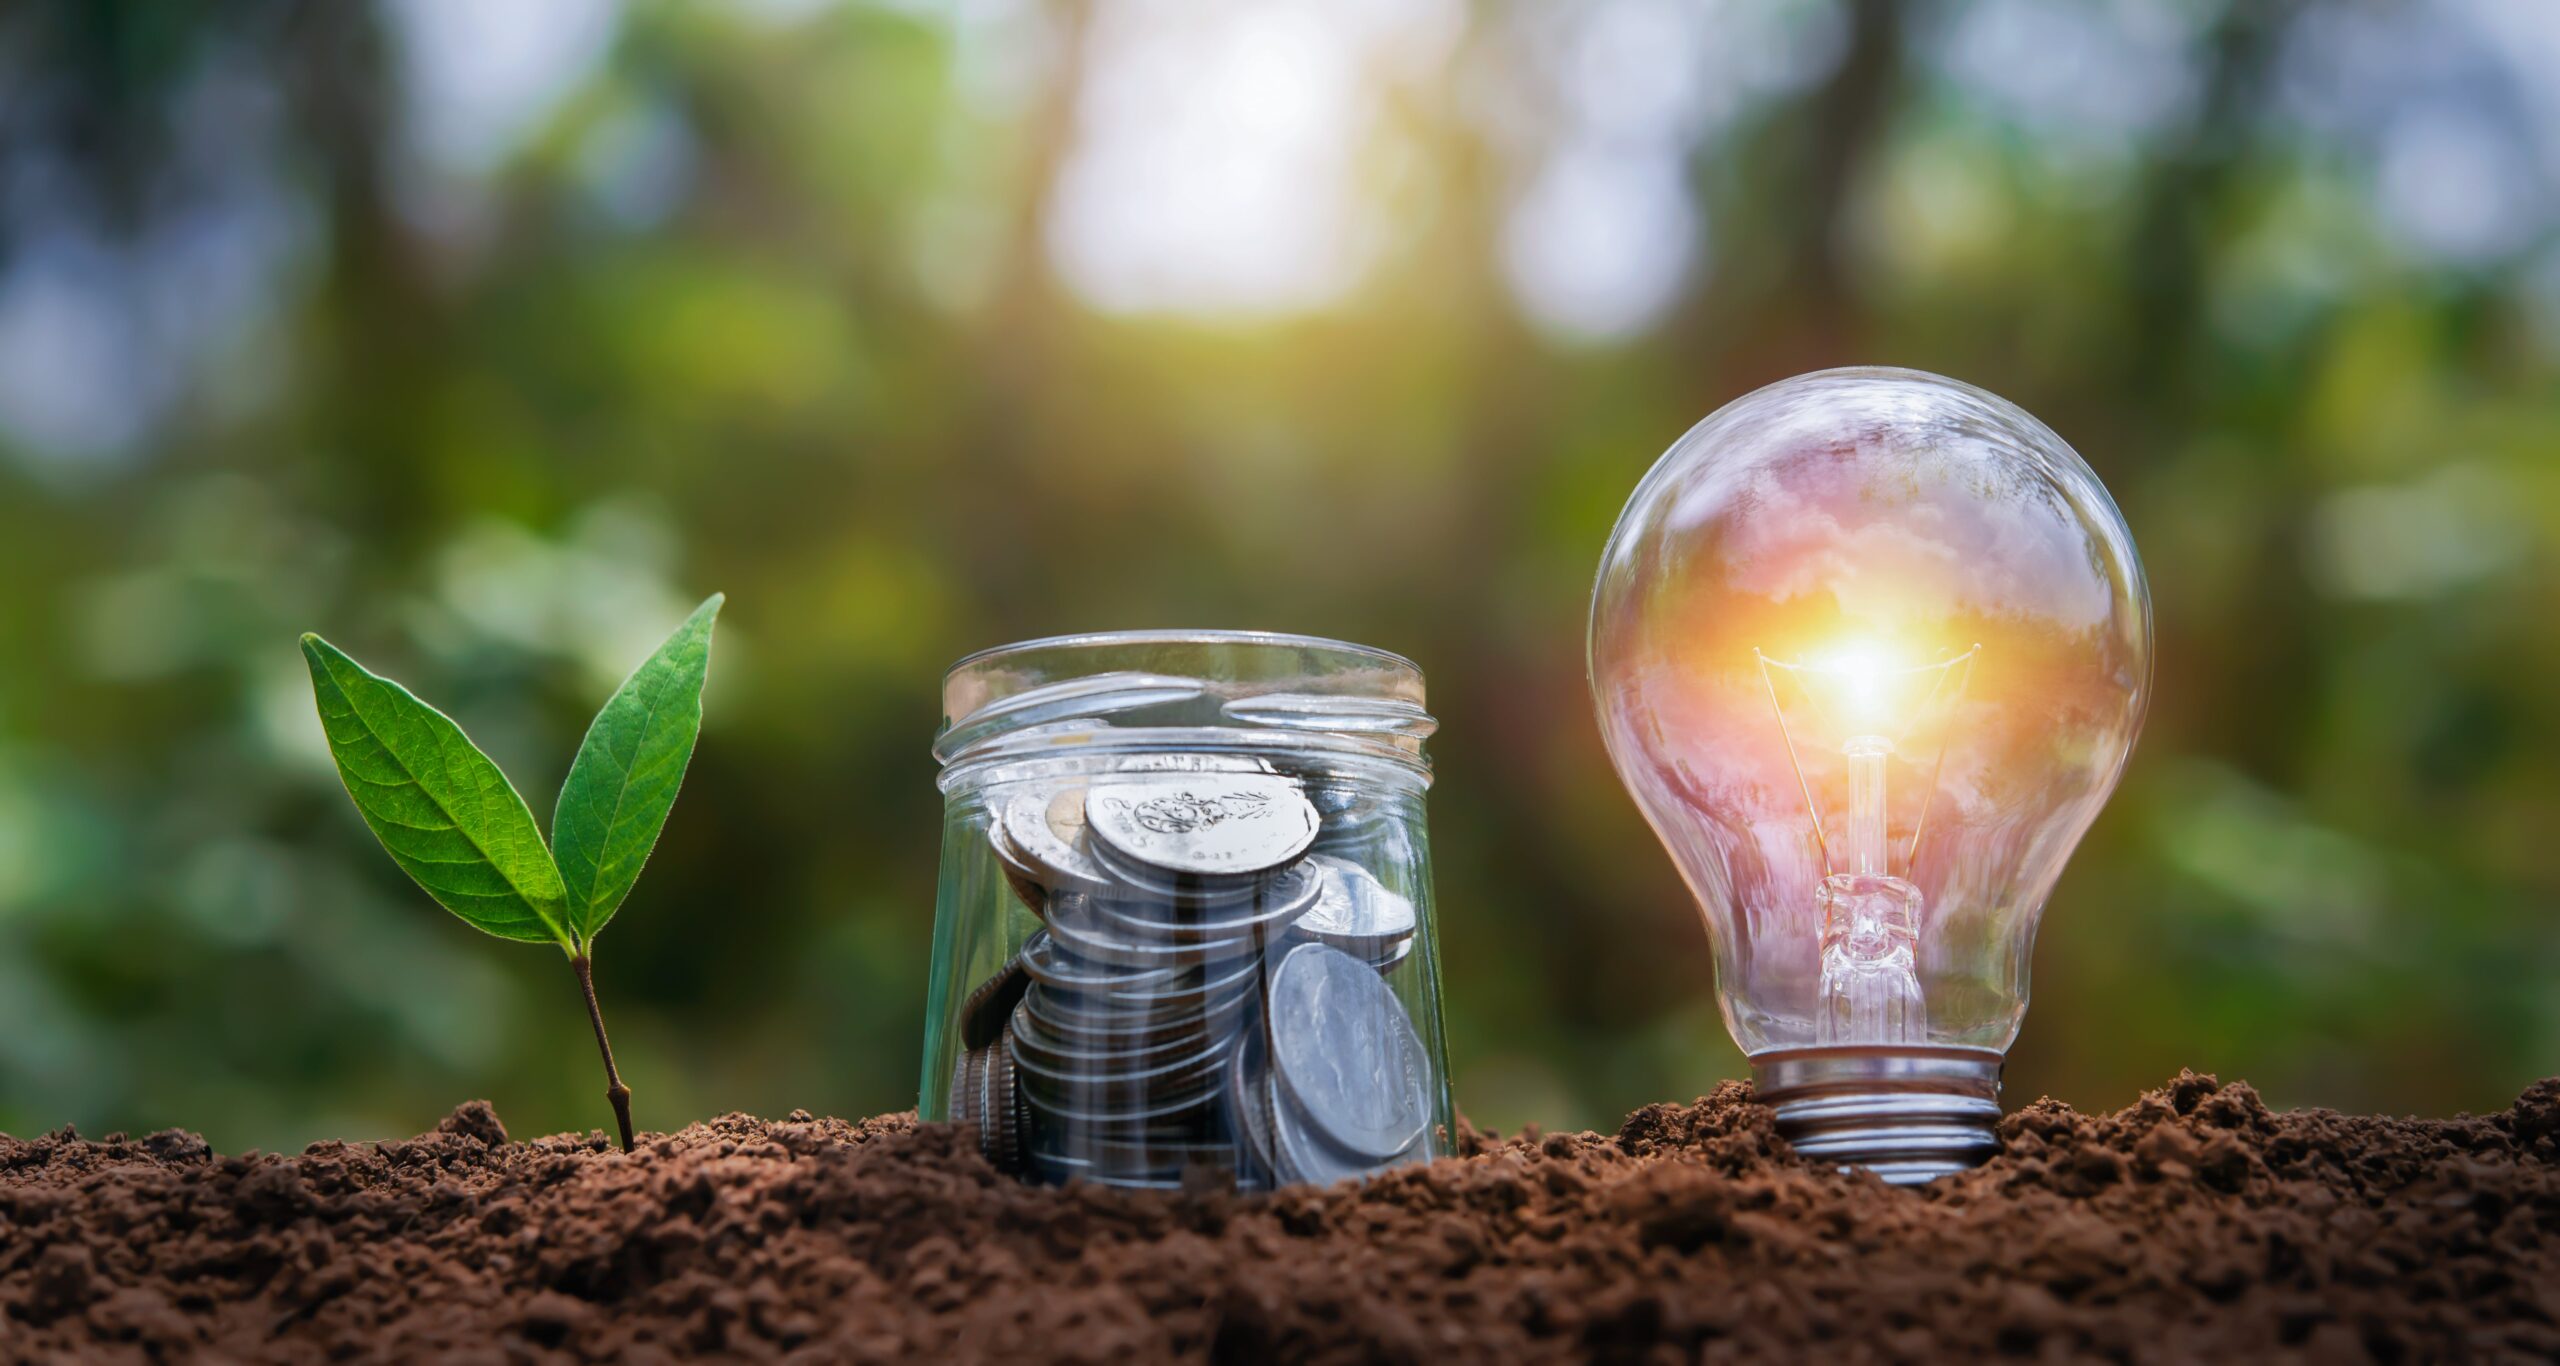 https://doradcy365.pl/wp-content/uploads/2021/10/lightbulb-with-plant-growing-money-jug-glass-soil-nature-saving-energy-power-finance-accounting-concept-min-scaled.jpg